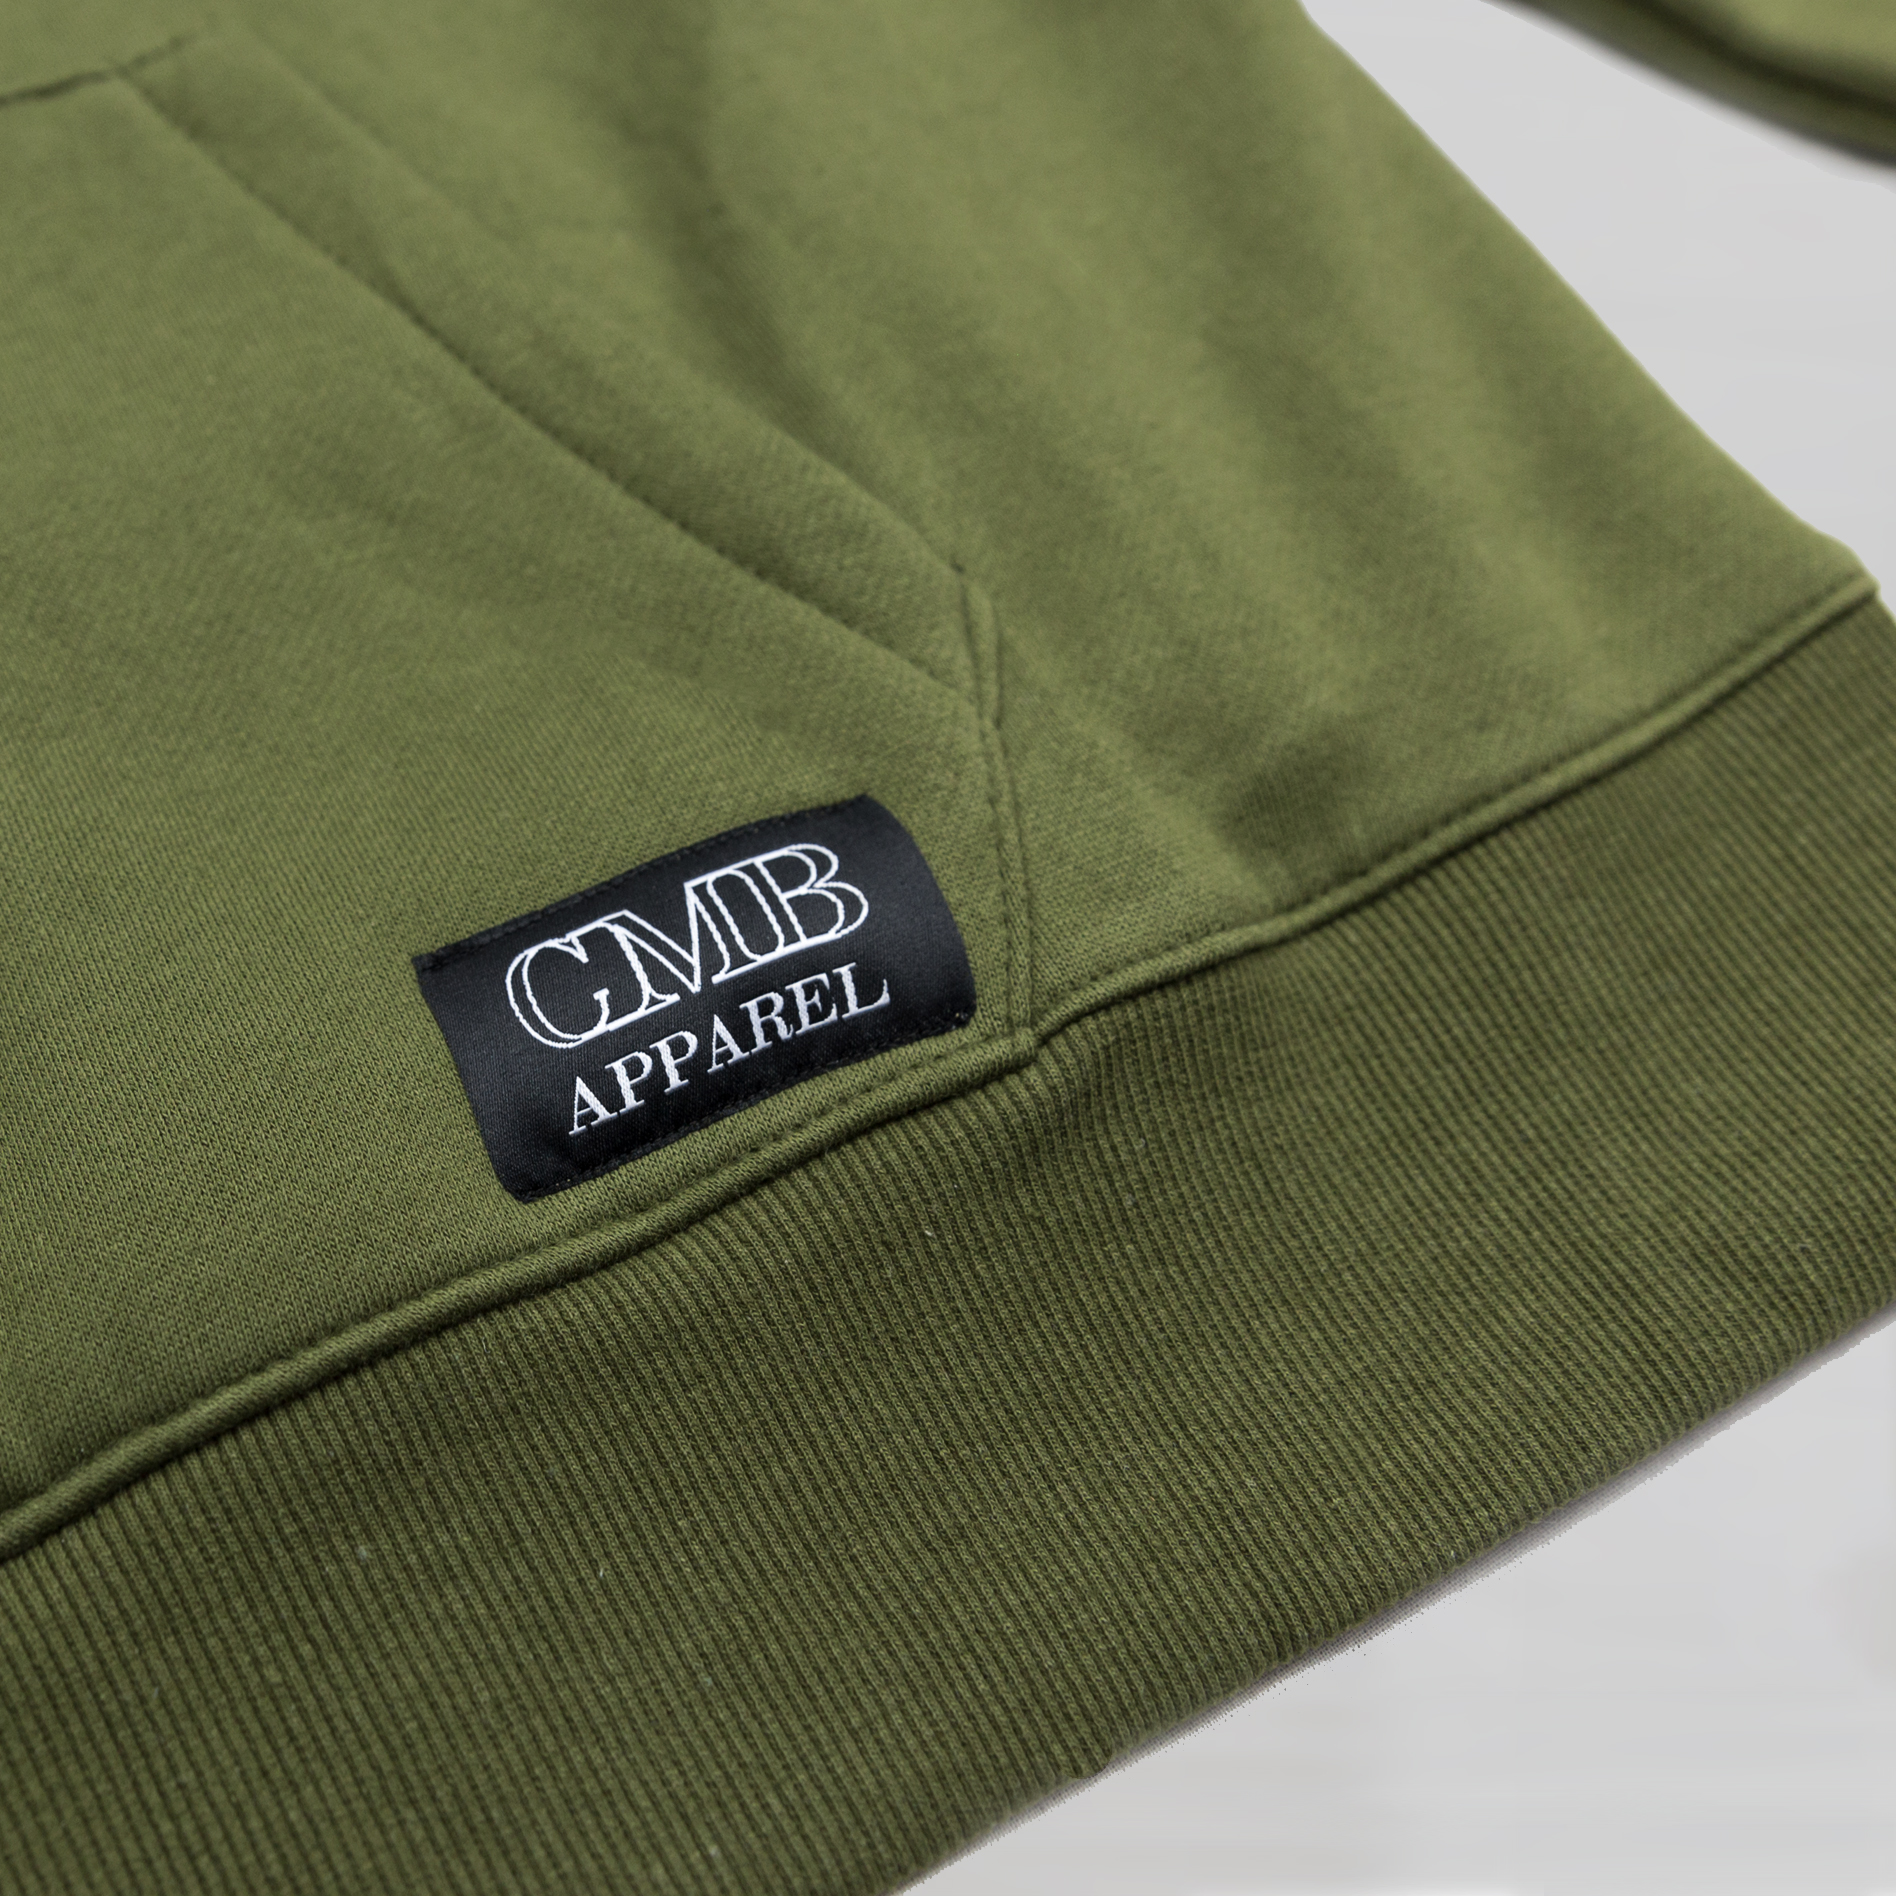 CMB Apparel oversized hoodies army green khaki olive